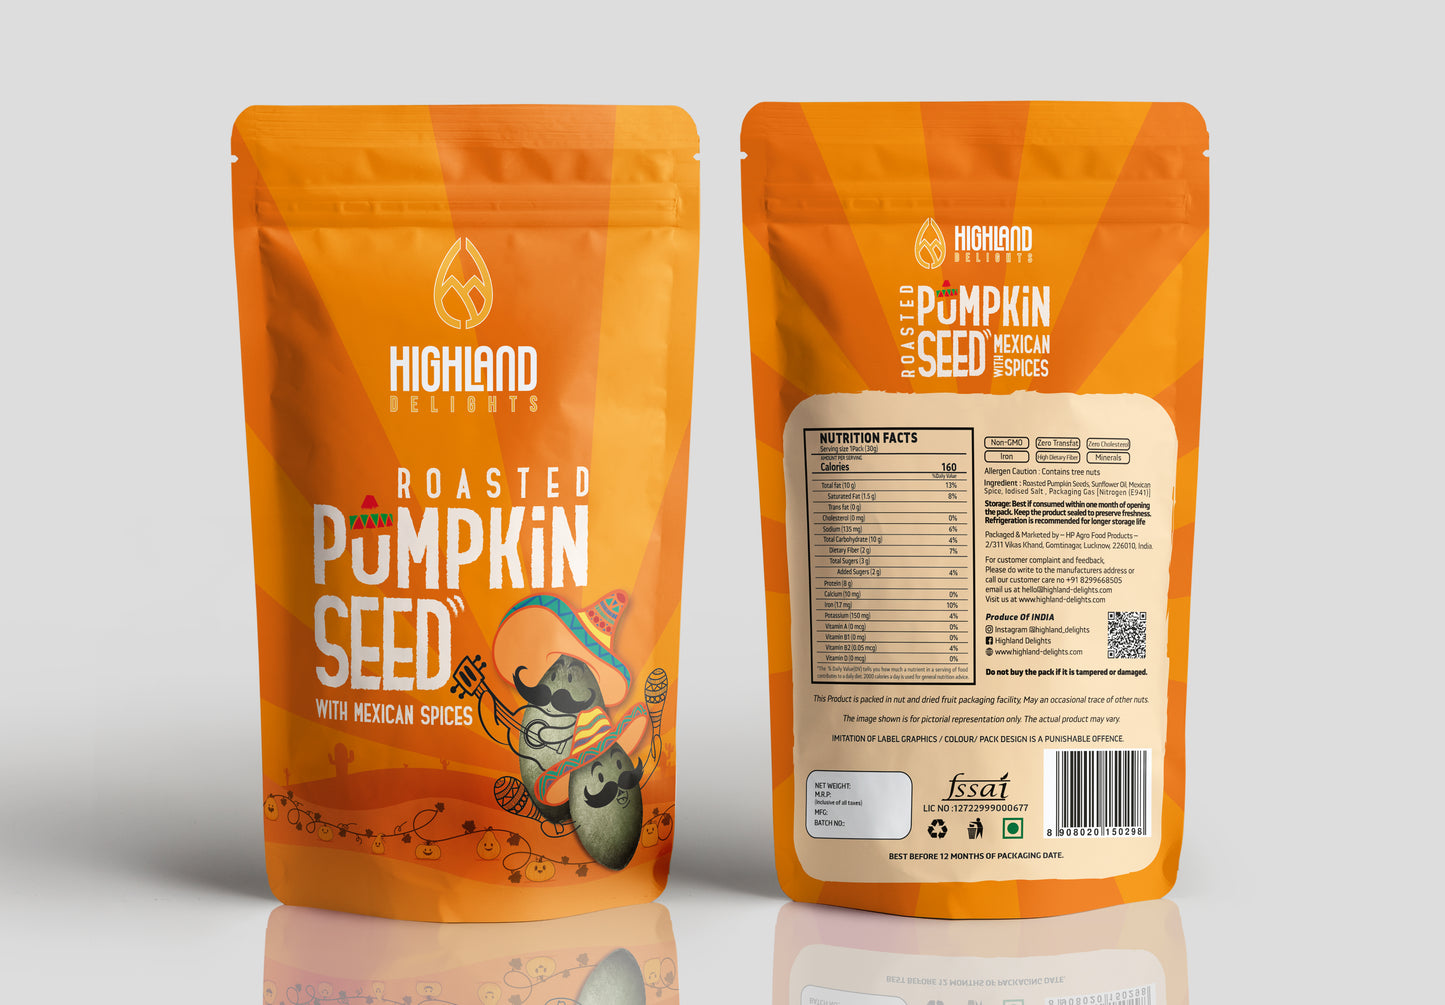 Mexican Spiced Roasted Pumpkin Seeds